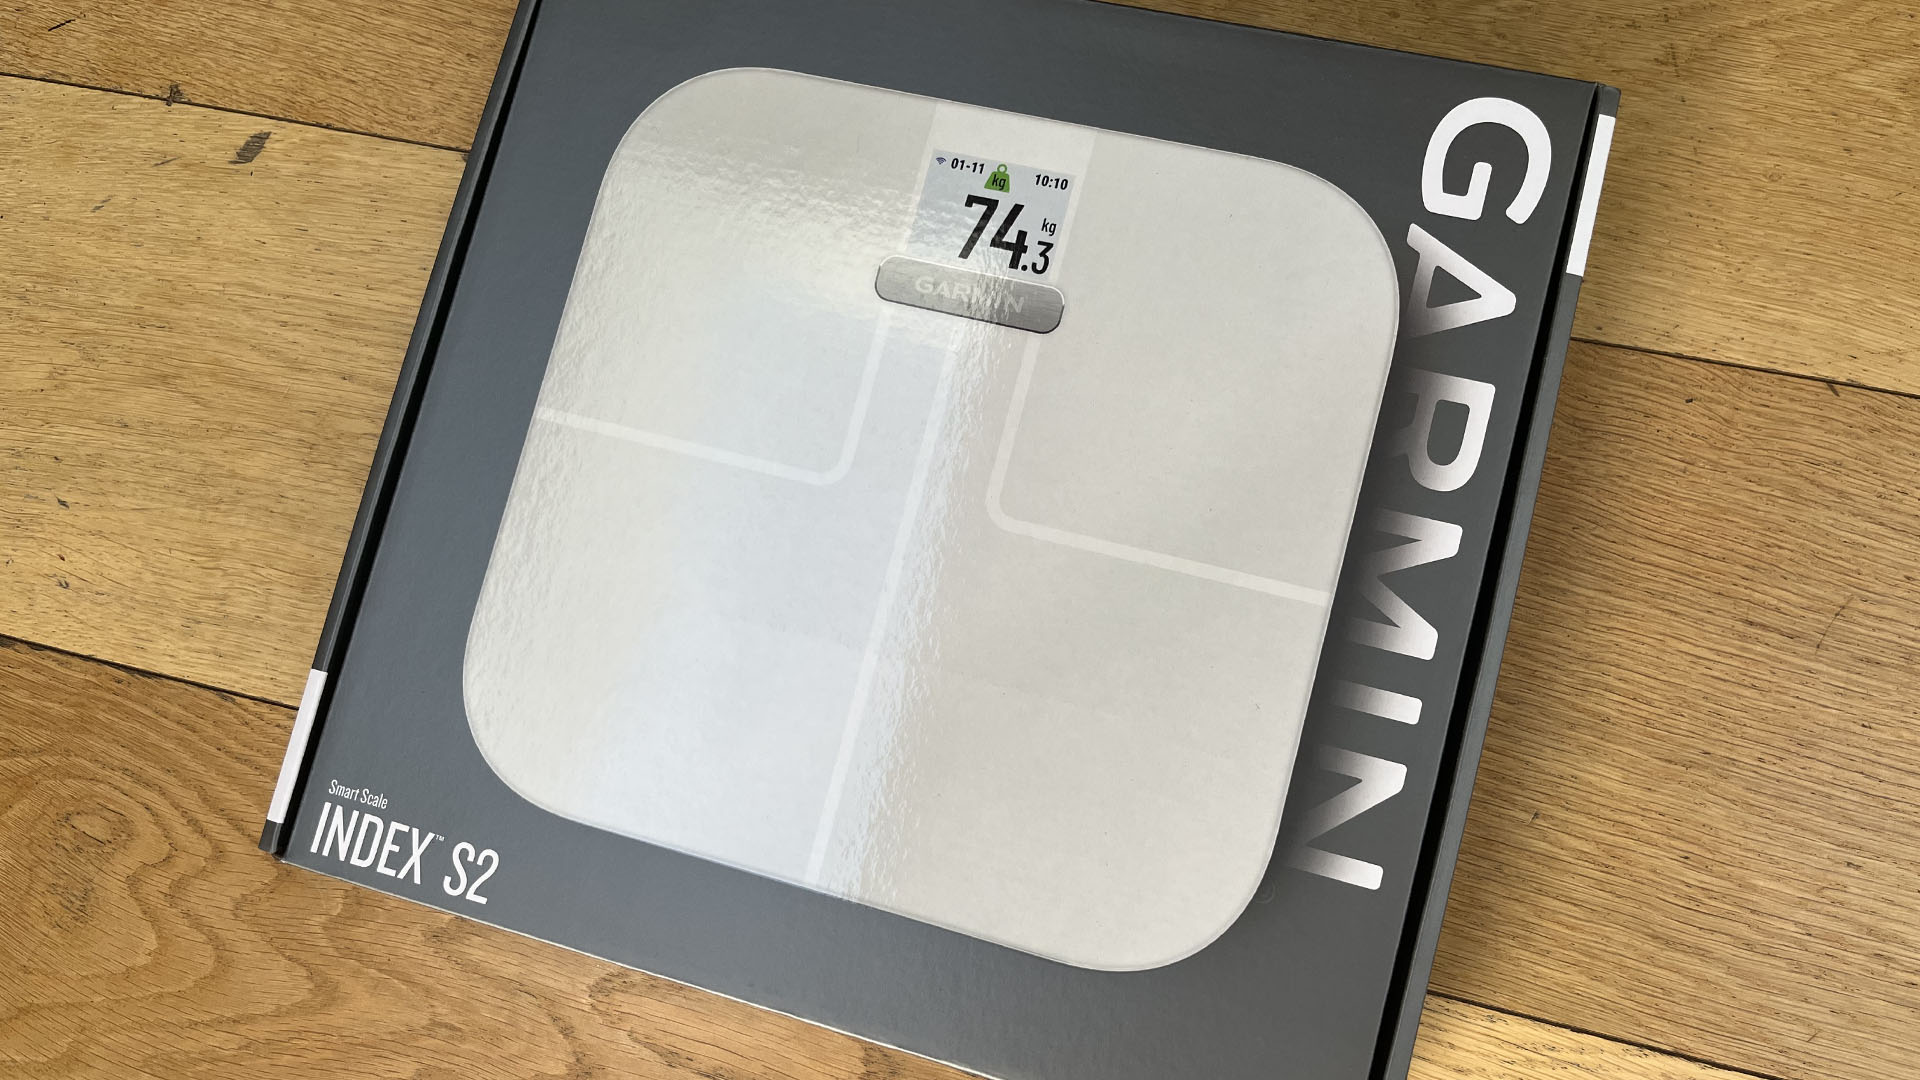 Garmin Index S2 smart scale being tested by Live Science contributor Maddy Bidulph